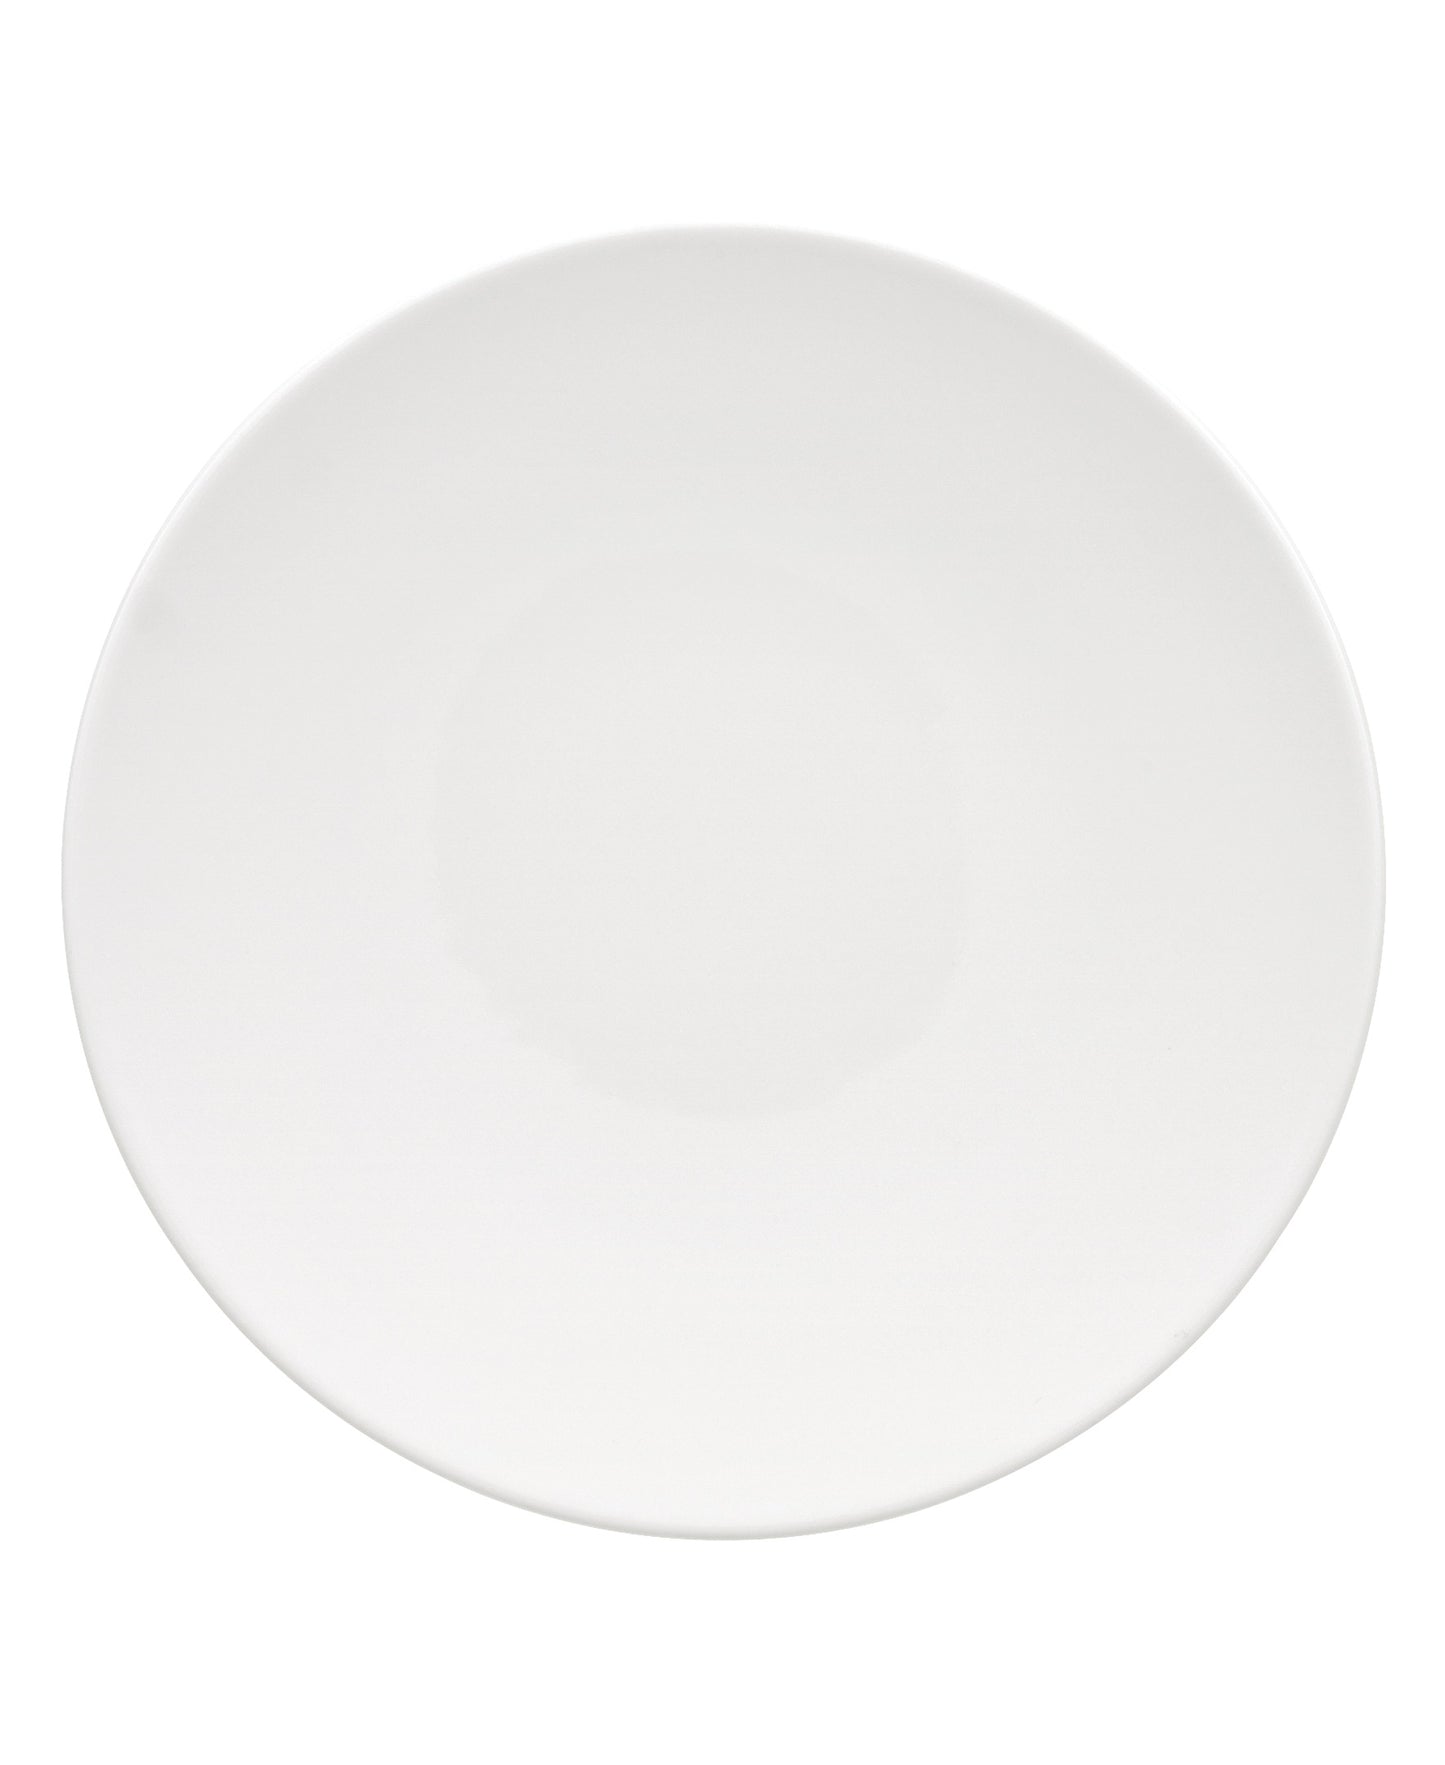 Dune Flat Coupe Plate, 8.2"